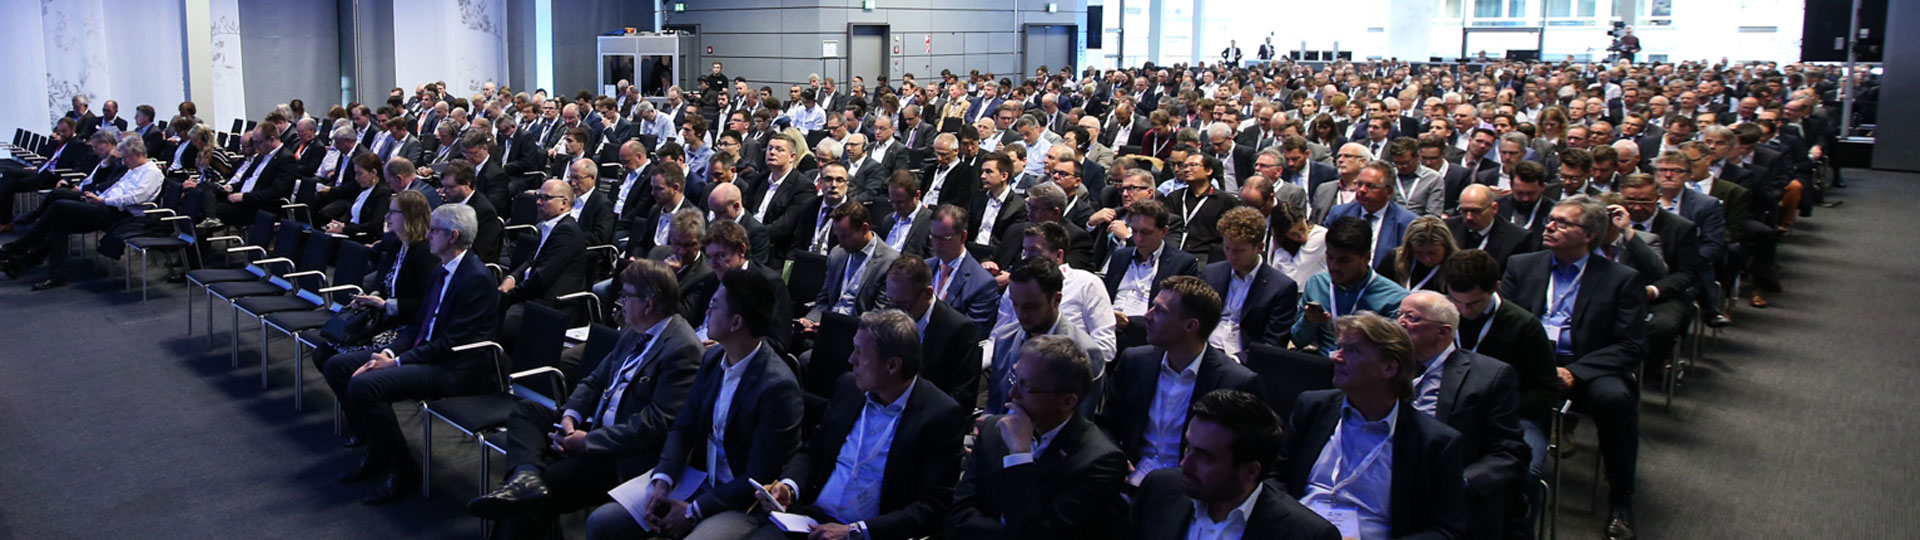 A picture that shows people attending a talk at the international congress for plastics in automotive engineering